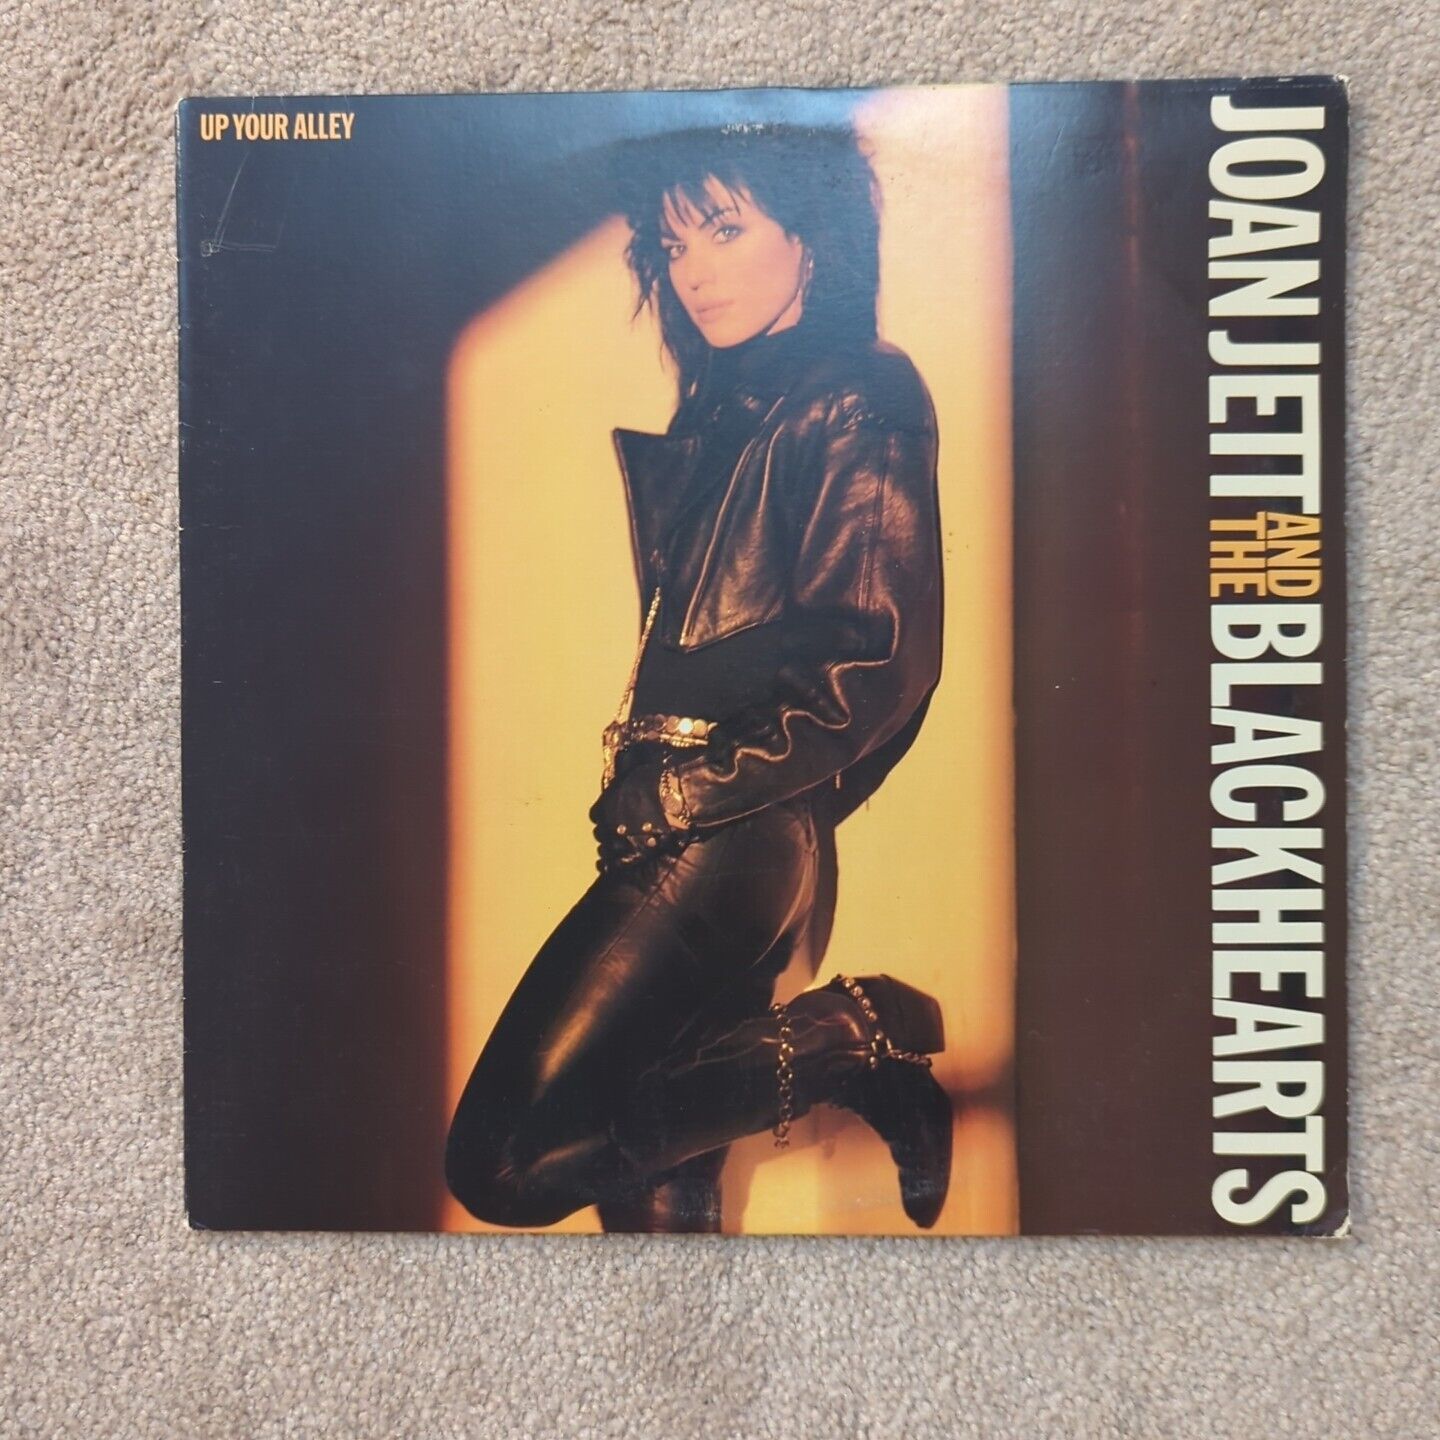 Joan Jett and the Blackhearts Up Your Alley 1988 LP Vinyl Vintage